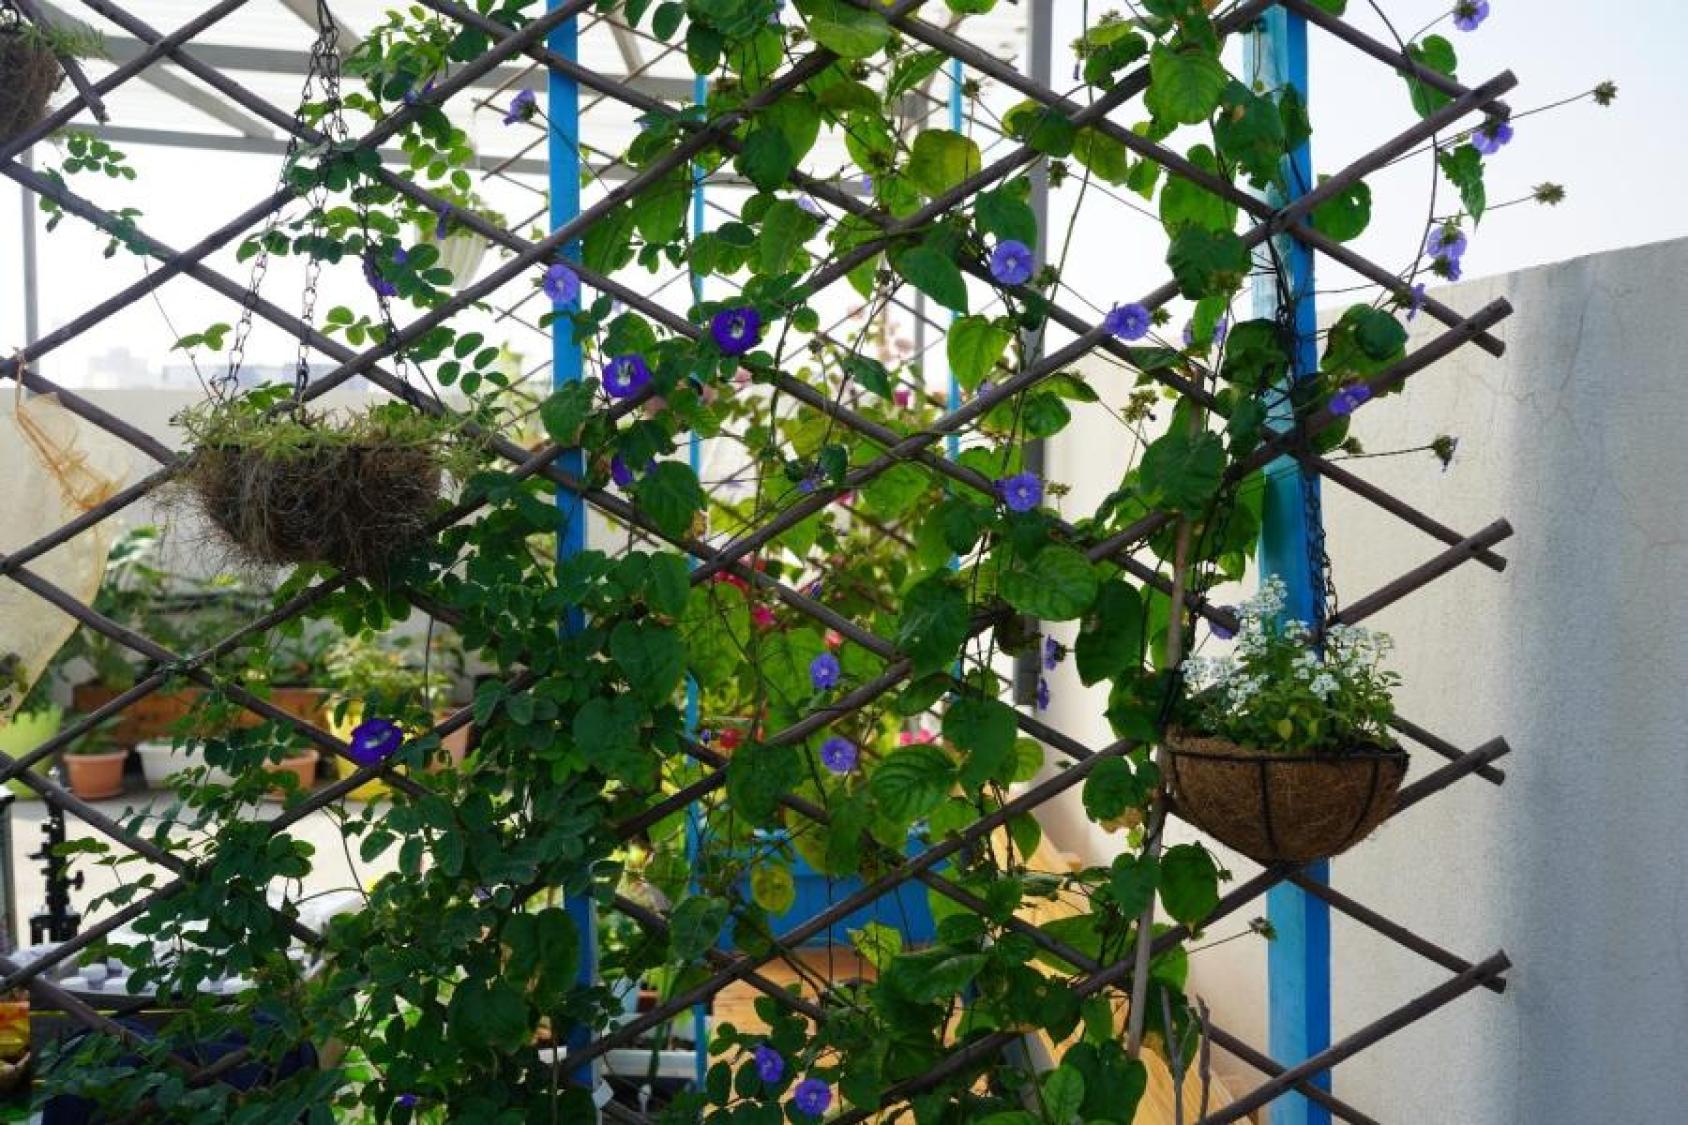 A plant vine on a rooftop garden